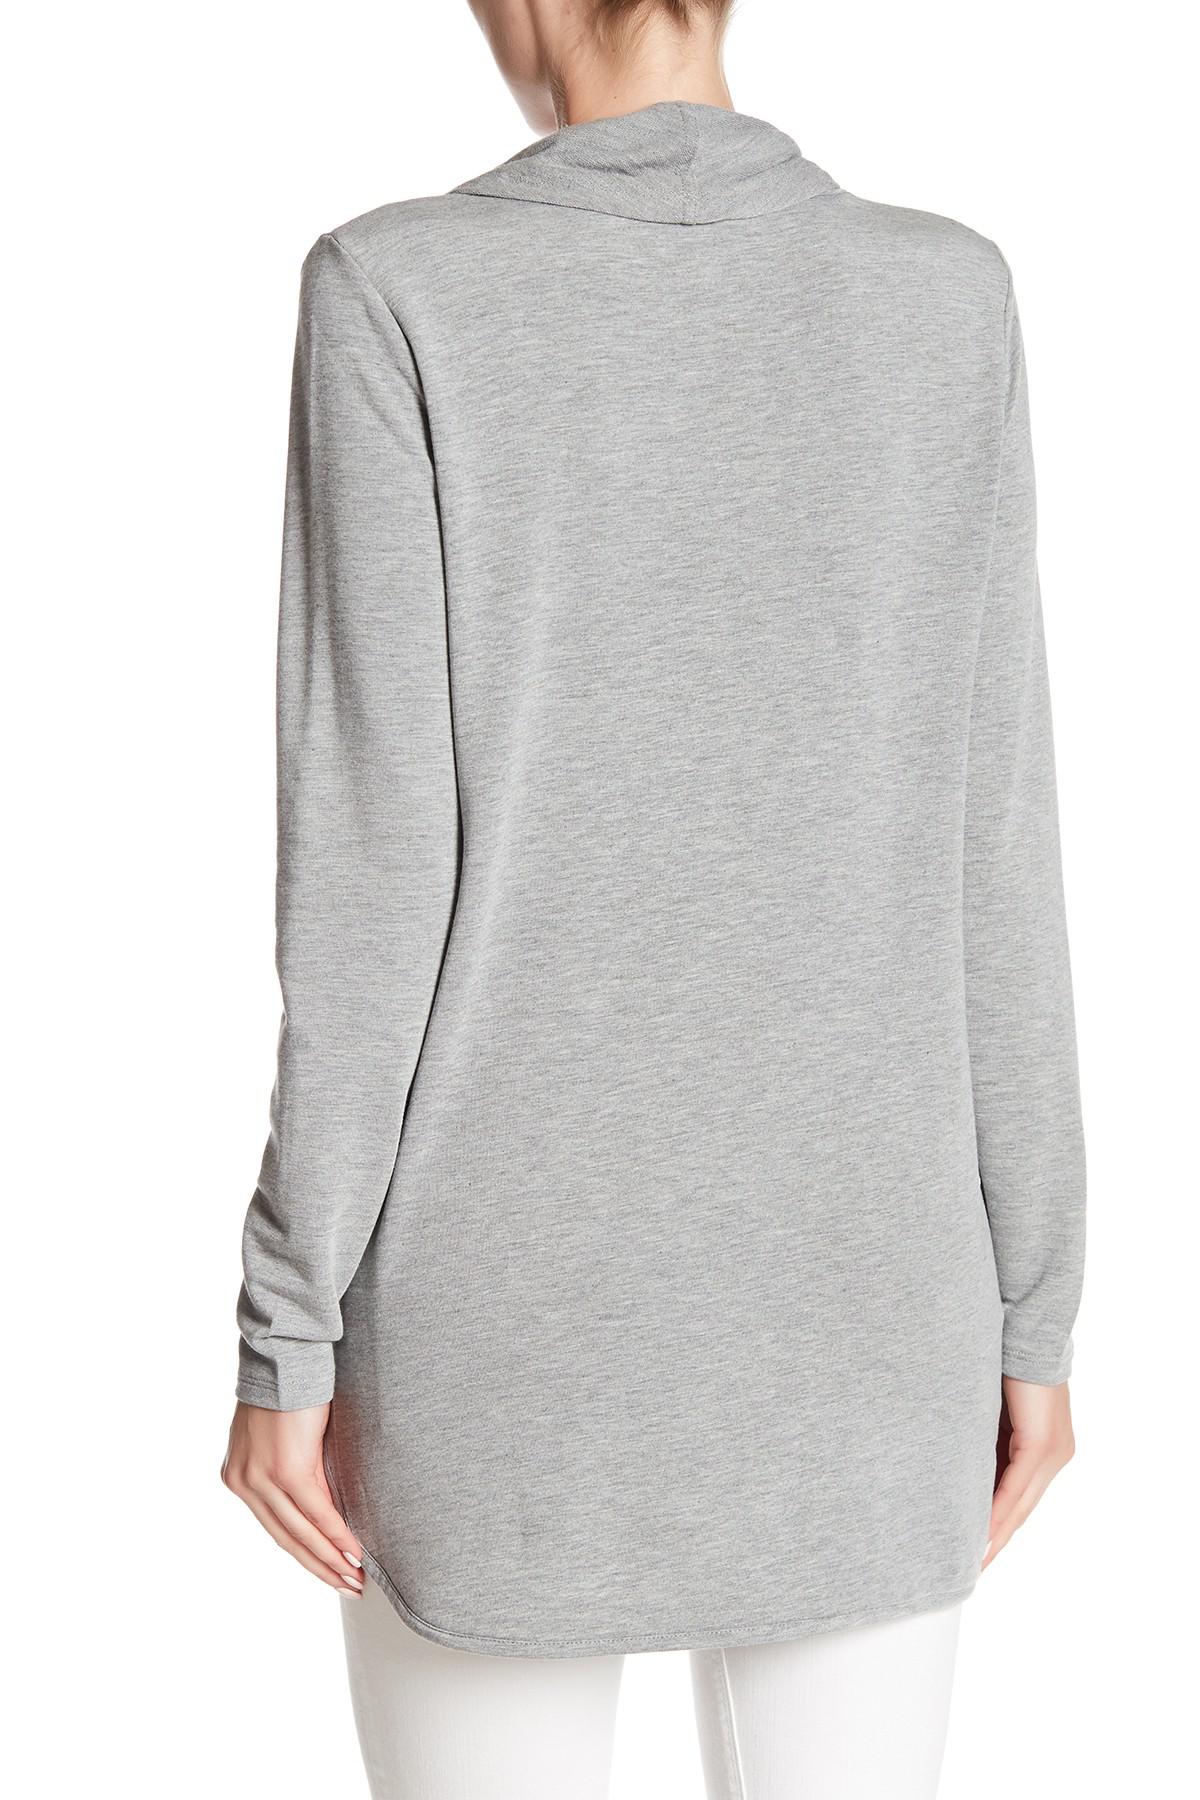 Cable & Gauge Cowl Neck Pocket Tunic in Gray | Lyst